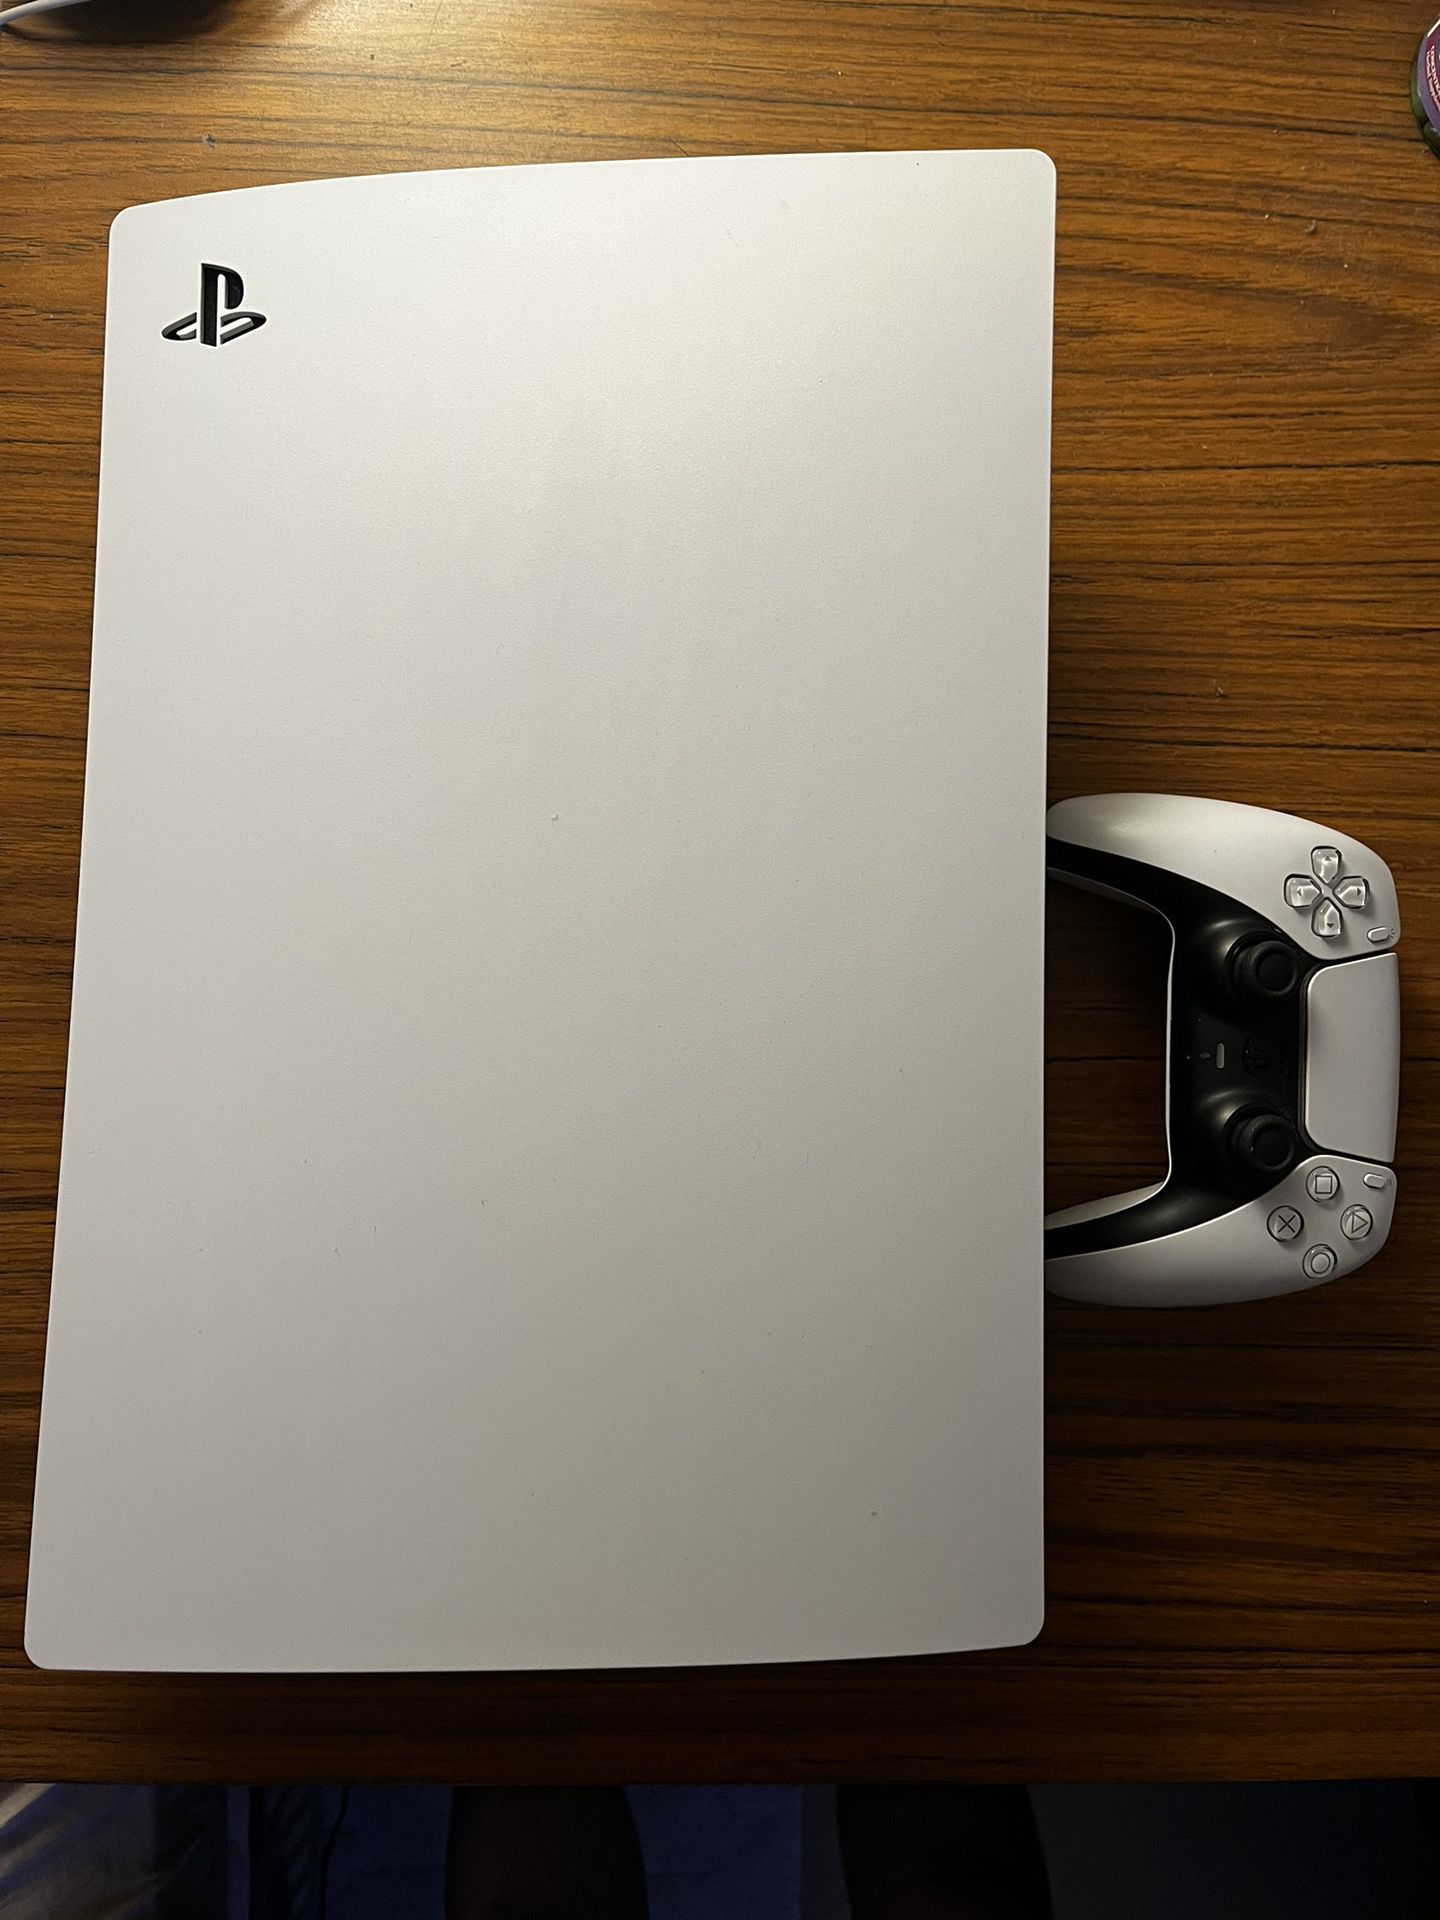 Ps5 *Disk Edition* + Games